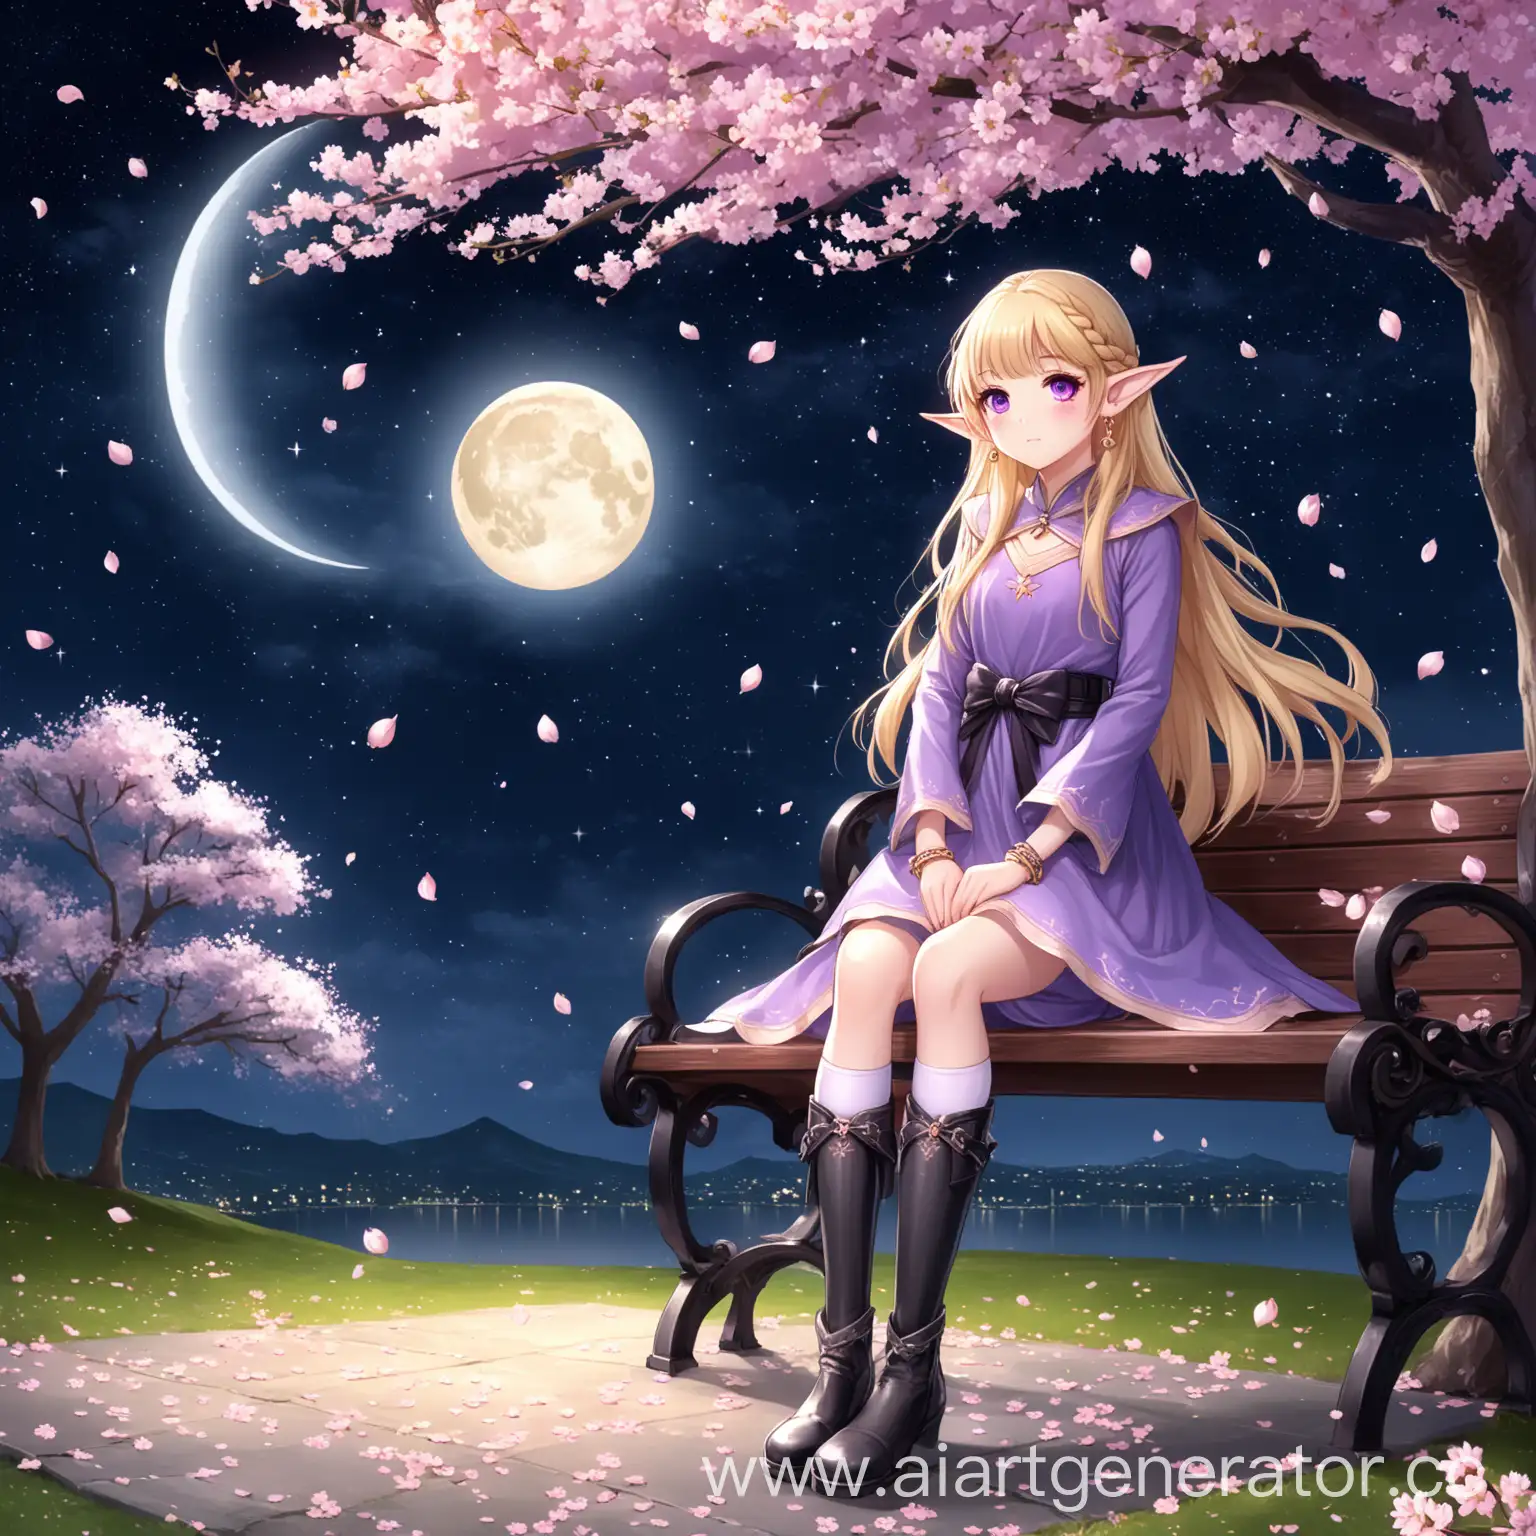 1 girl, belt, black shoes, blush, boots, braid, closed mouth, dress, earrings, jewelry, long sleeves, curtain on hips, knee socks, bangs, blonde hair, stars, blush, bow, bracelet, chest, purple eyes, elf, pointed ears, cherry blossom, night, full body, long hair, moon gazer, outdoors, petals, sky, solo, standing, bench